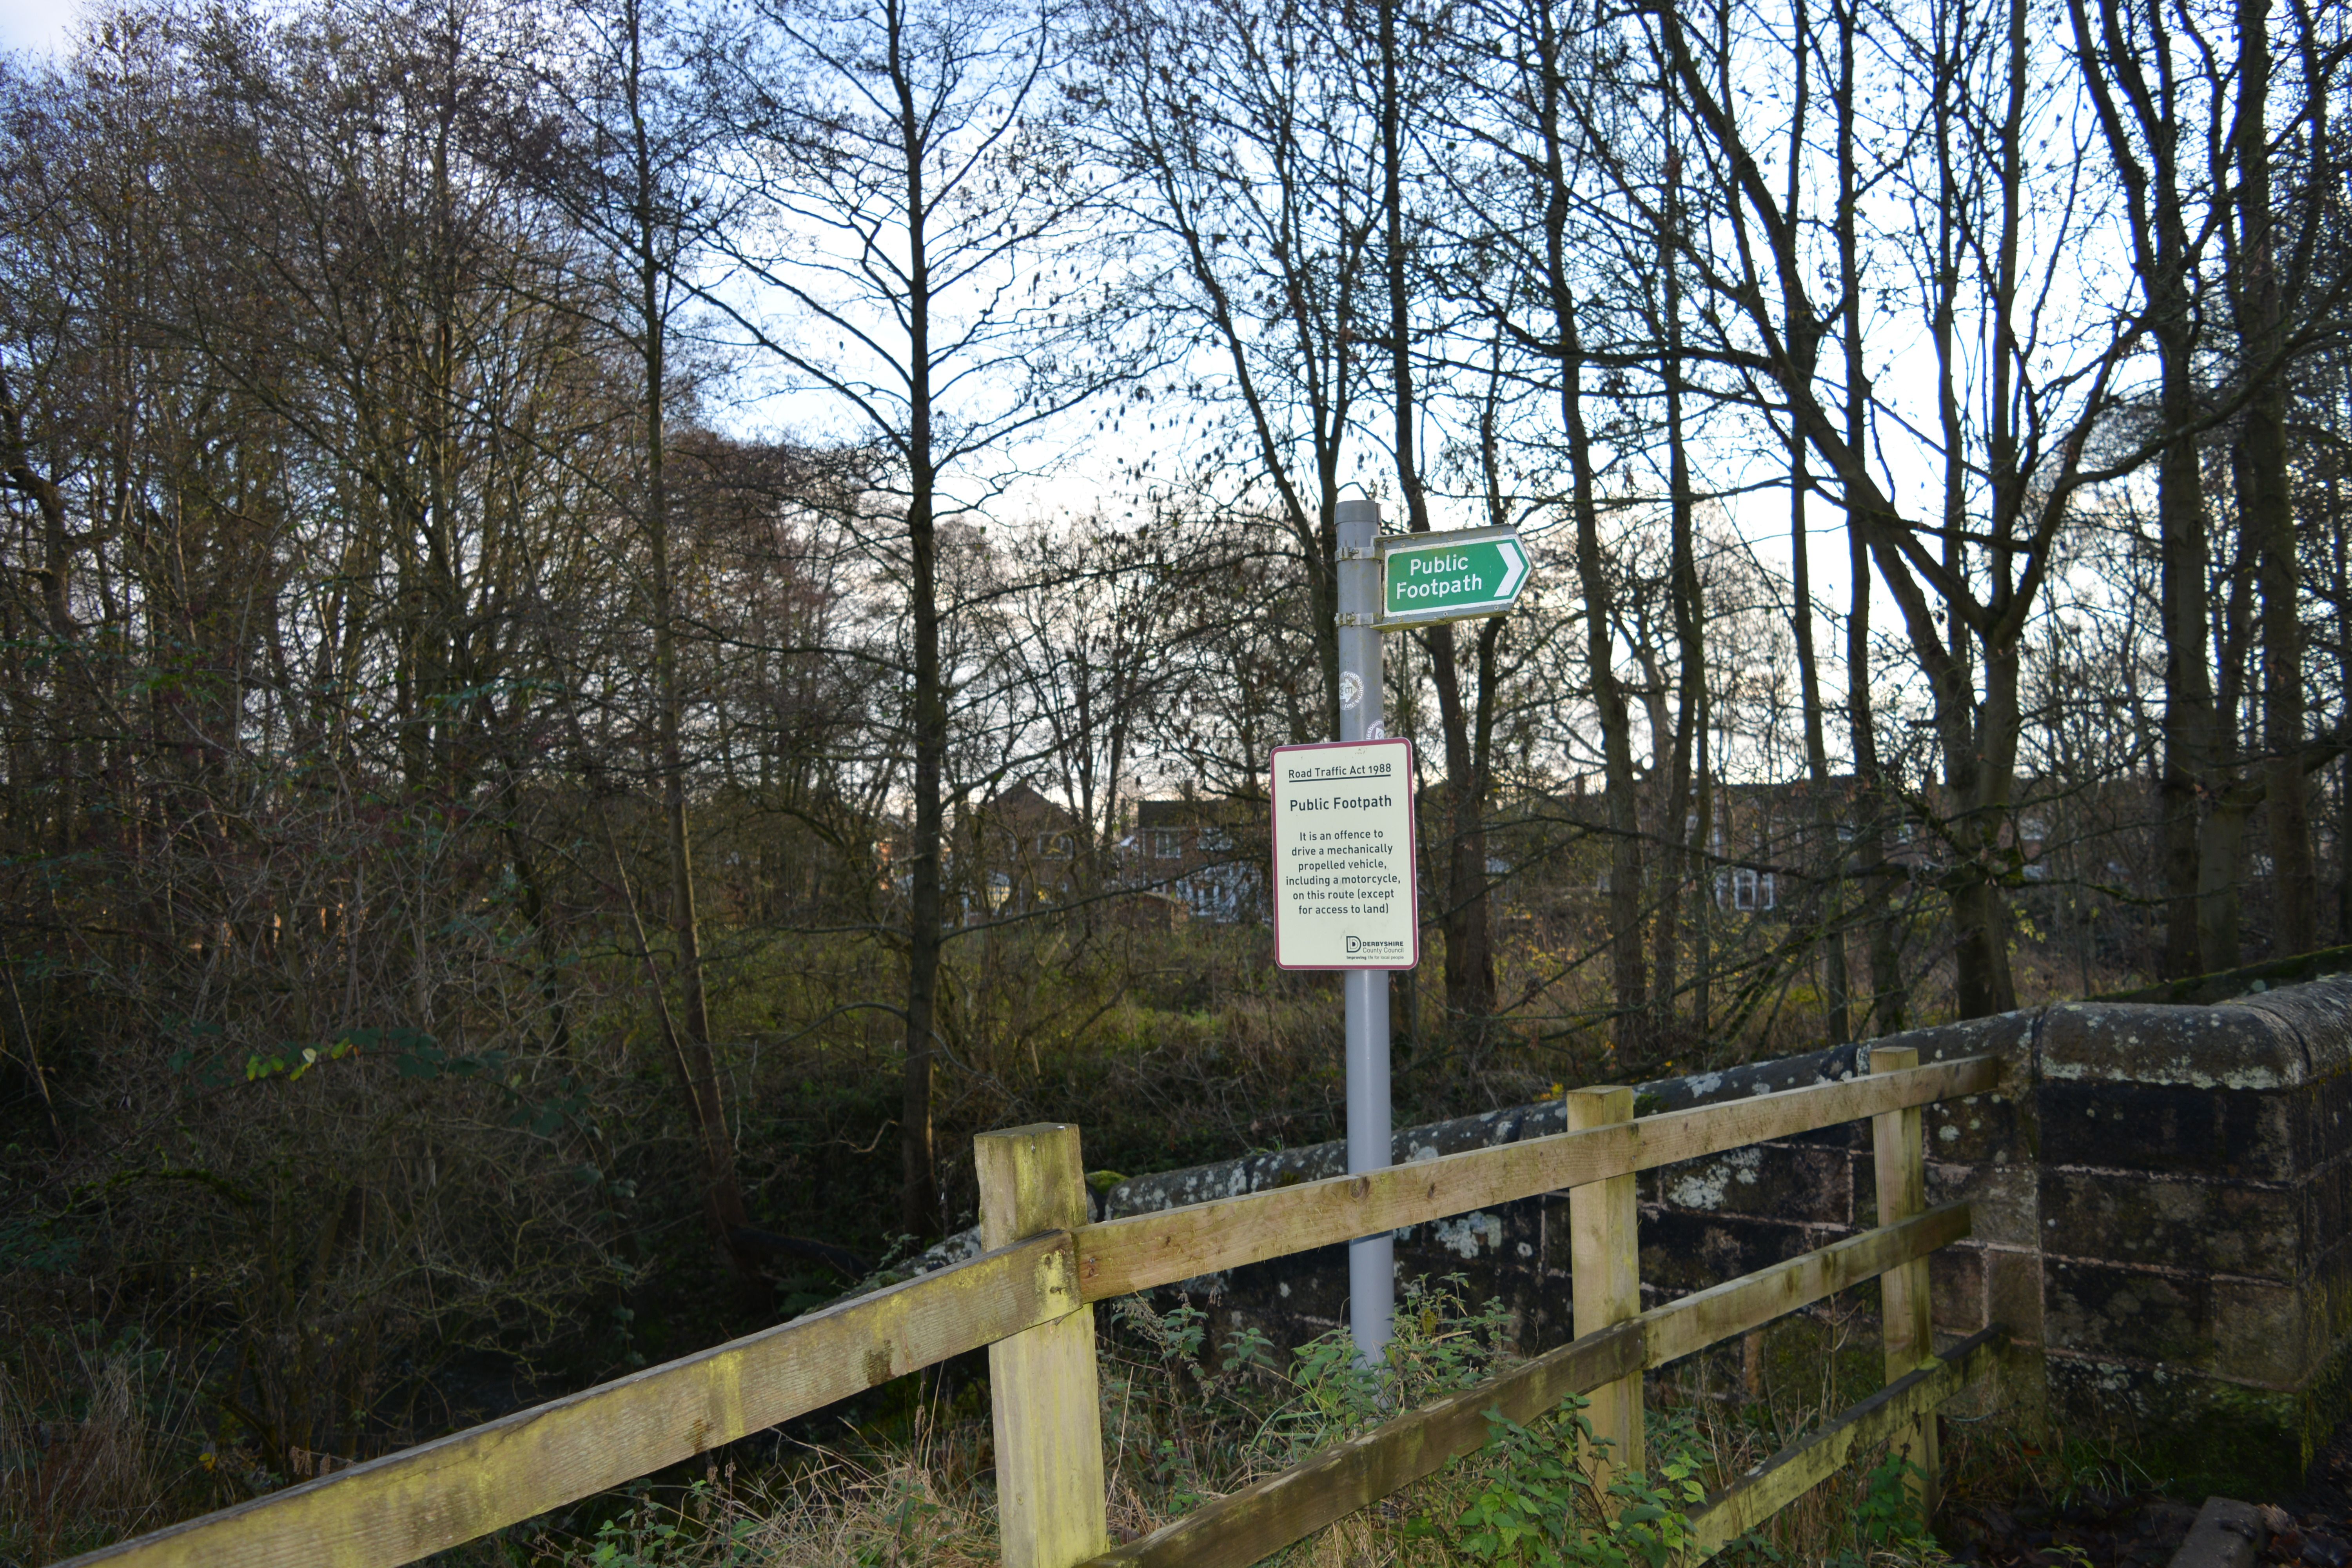 Path continues alongside river to Duffield Meadows